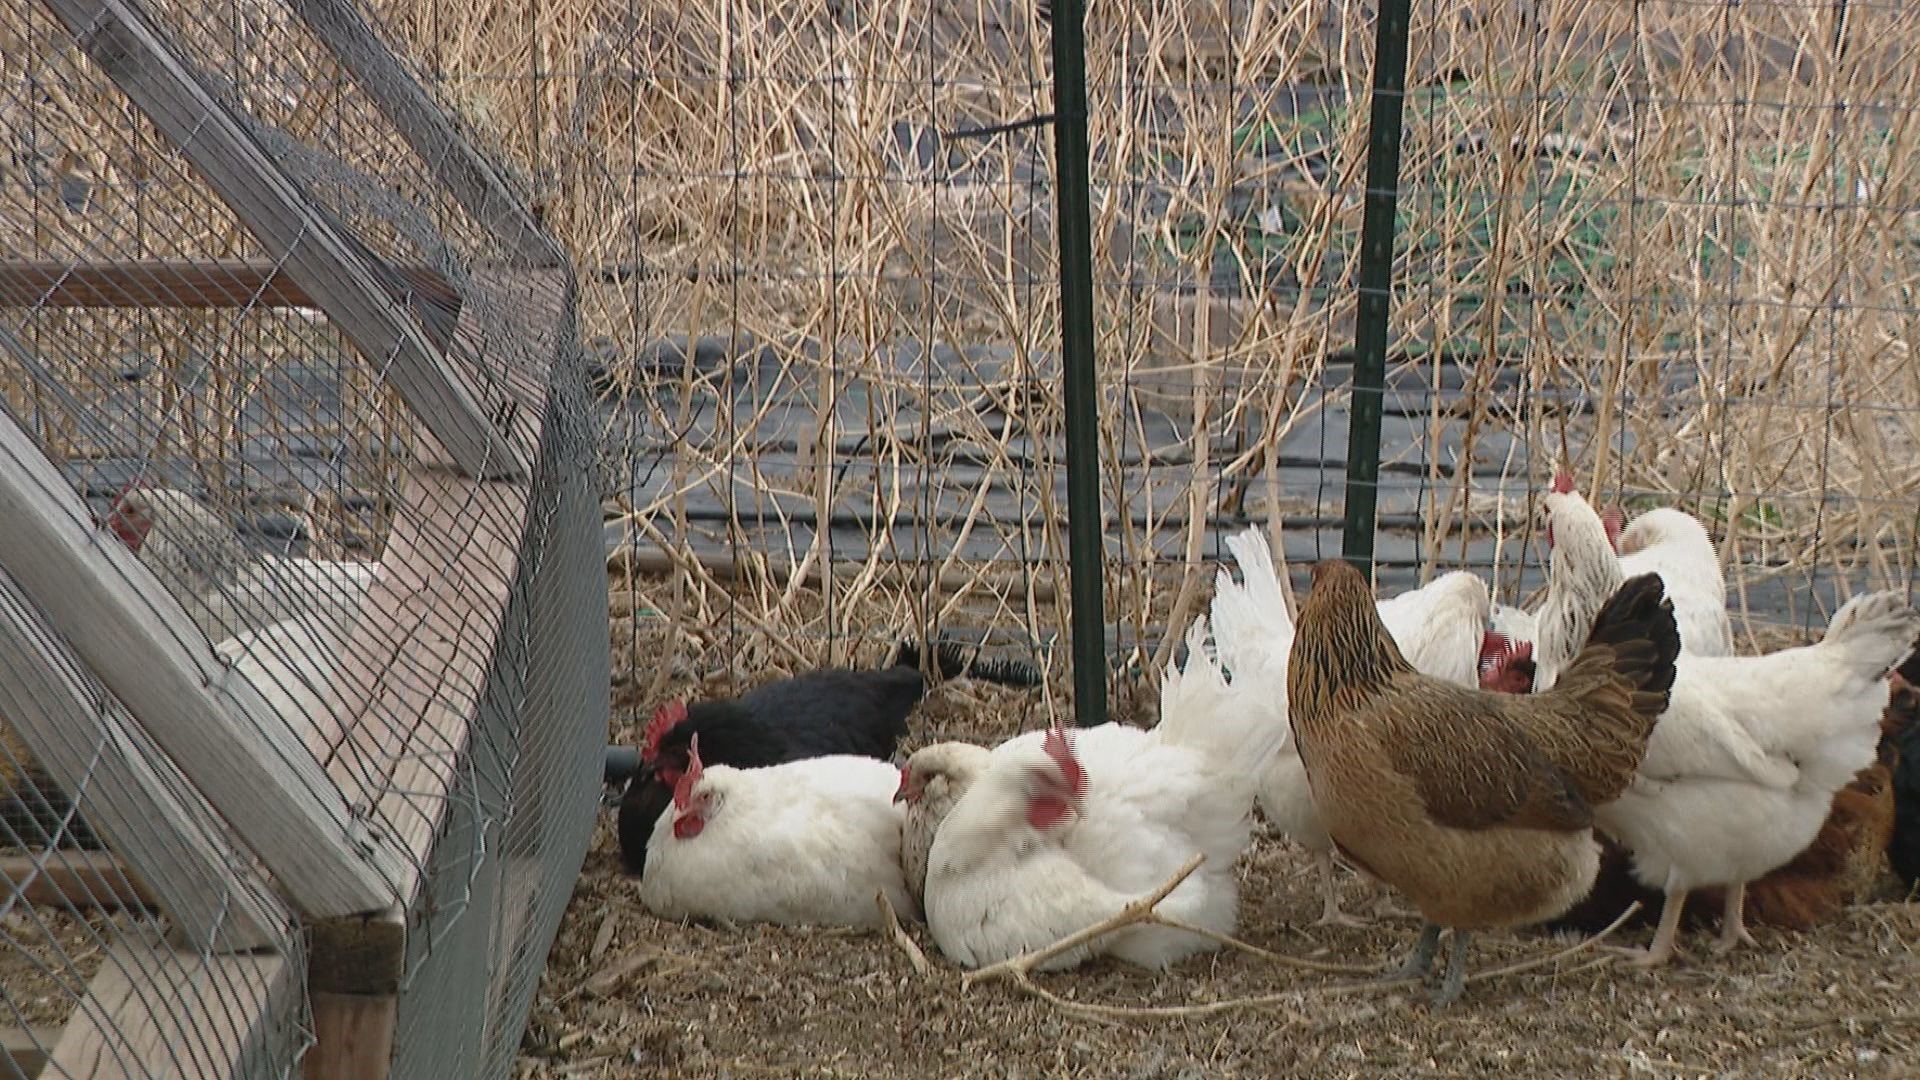 9Health Expert Dr. Payal Kohli discusses what to know about the nationwide avian influenza outbreak, and provides analysis on Colorado’s current COVID-19 situation.